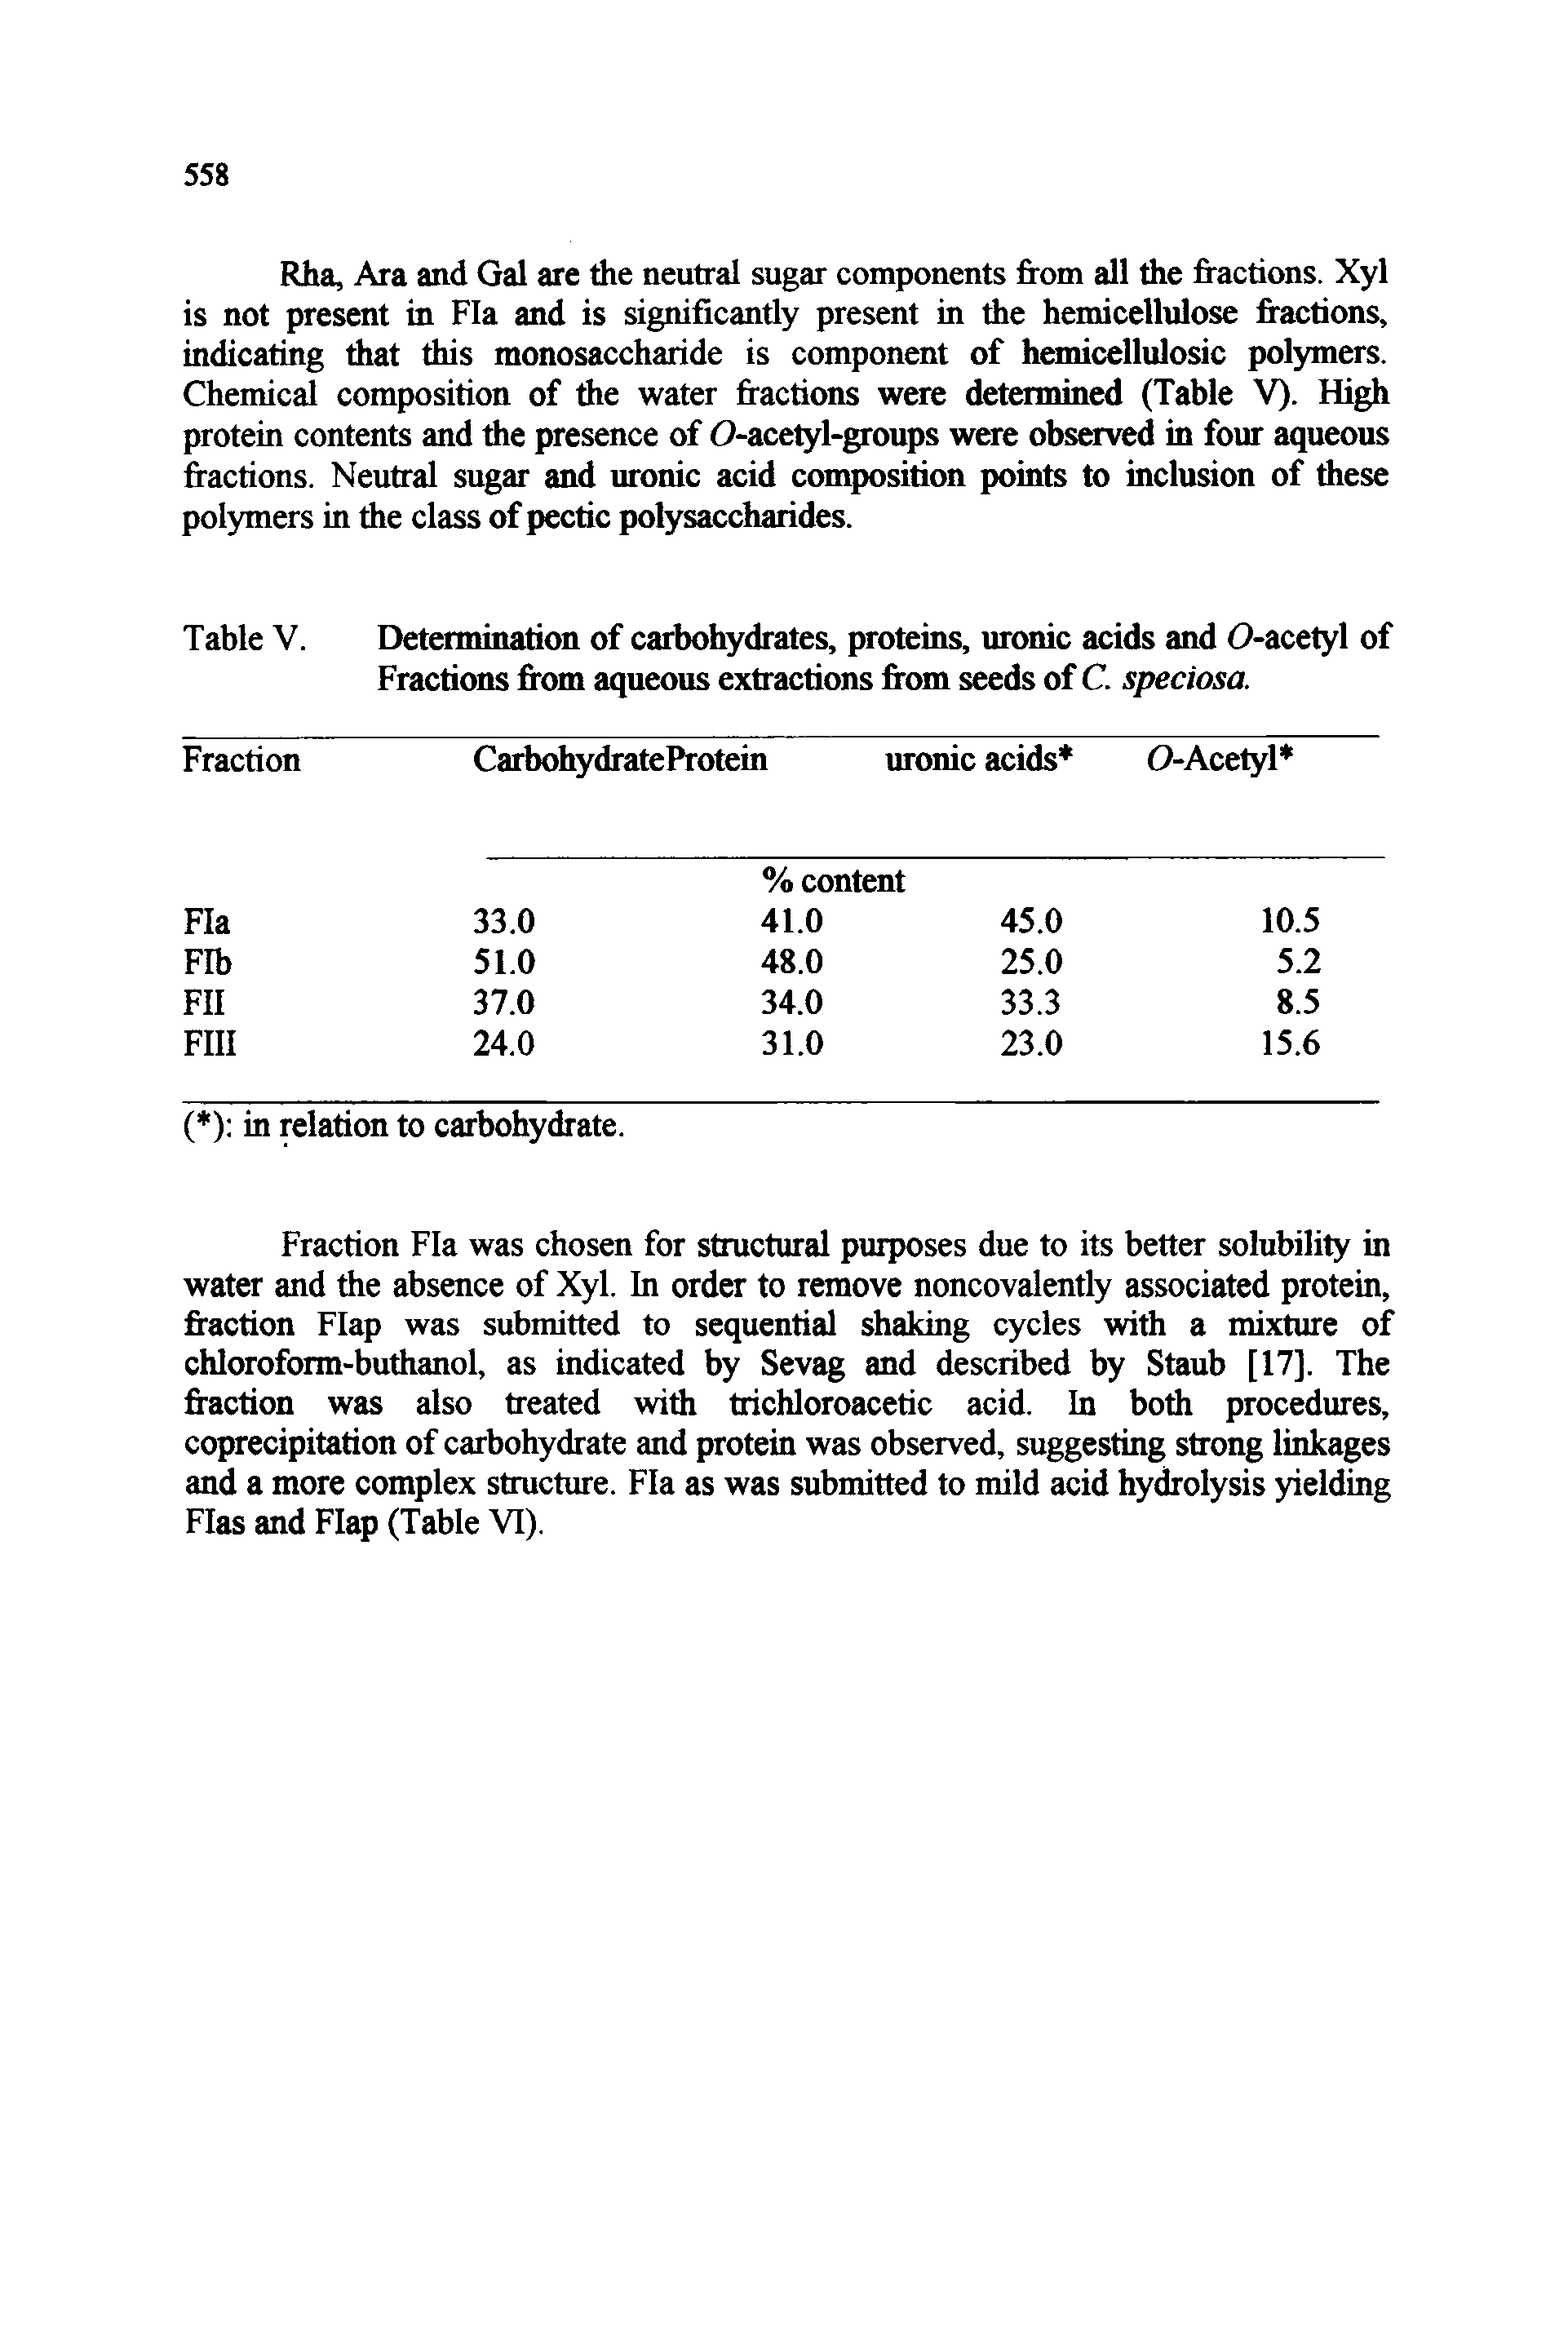 Table V. Determination of carbohydrates, proteins, uronic acids and 0-acetyl of Fractions from aqueous extractions from seeds of C. speciosa.